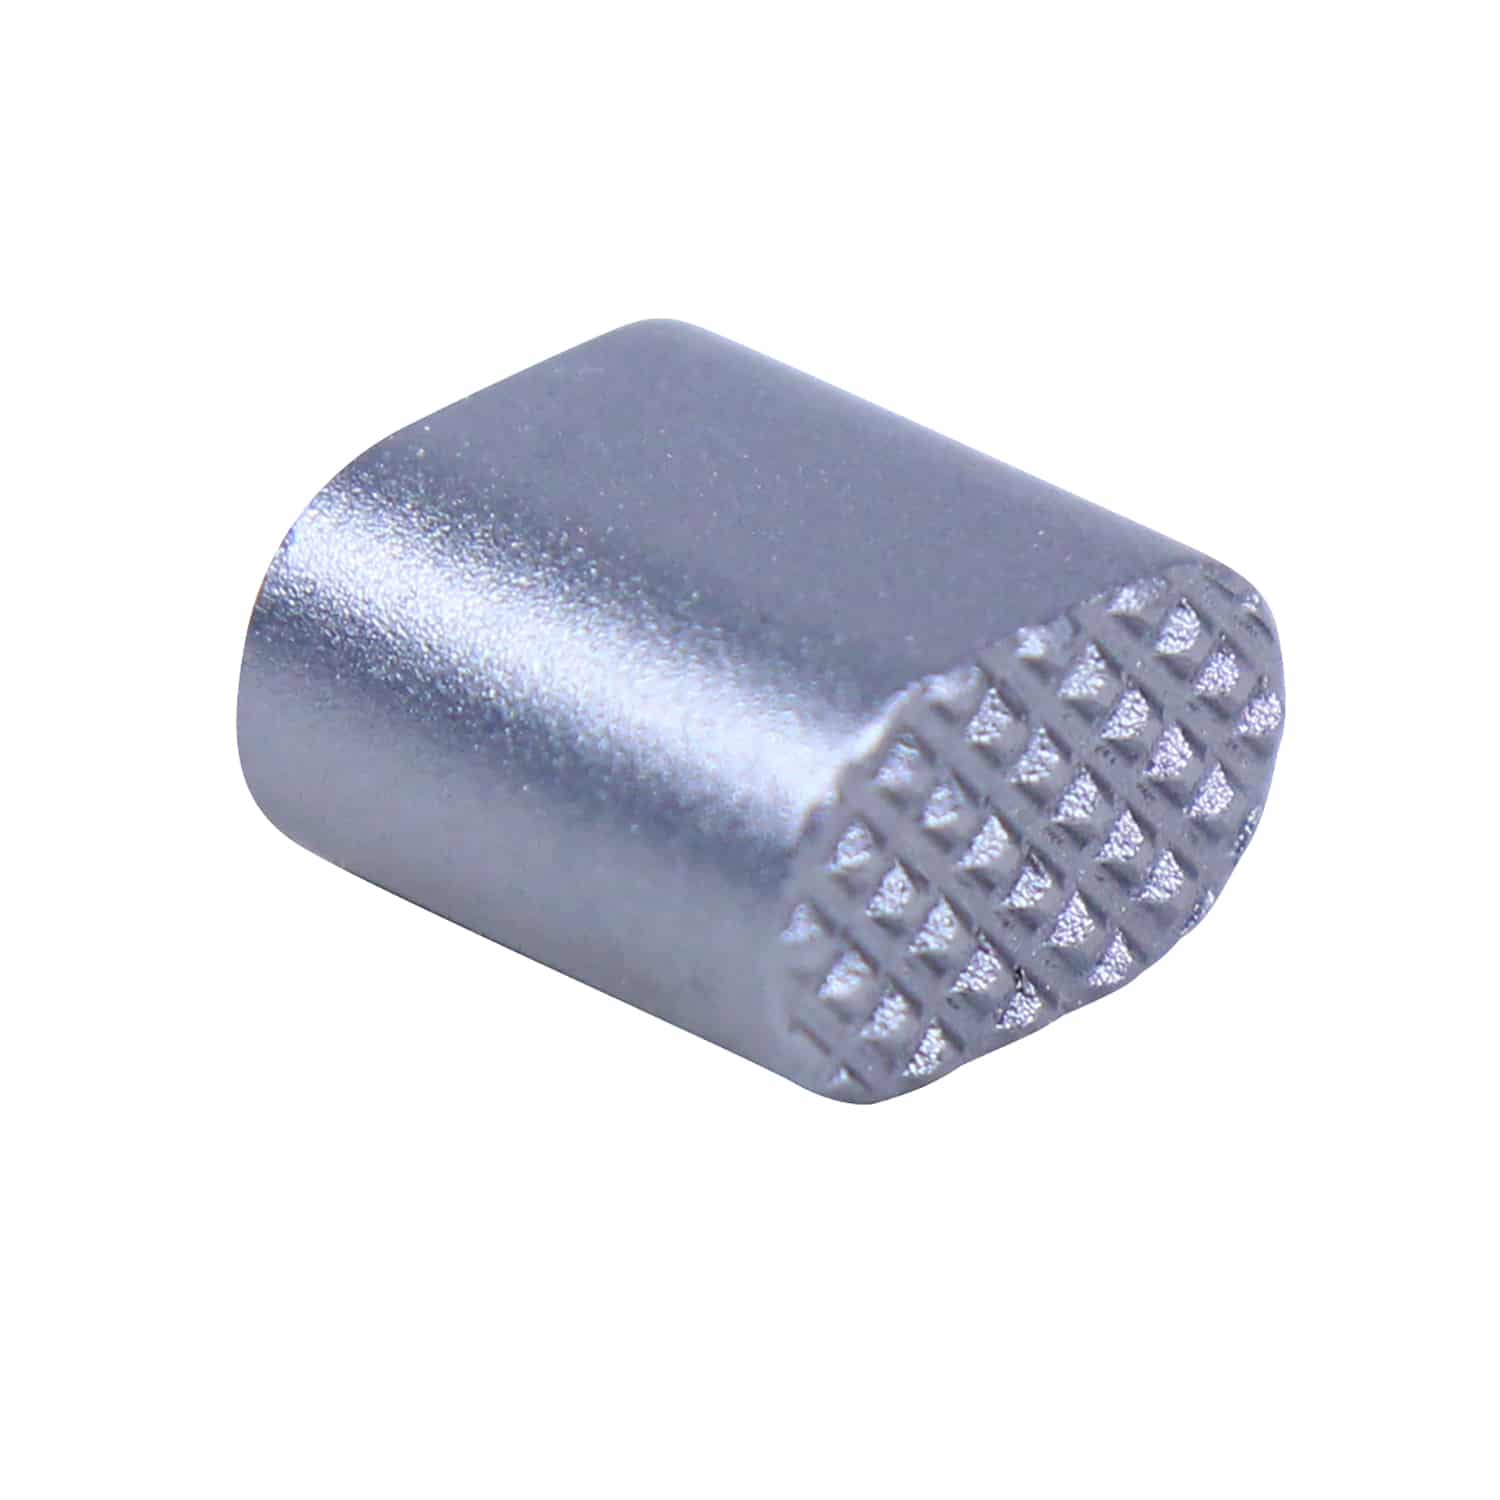 AR-15 Extended Magazine Release Button in Anodized Grey